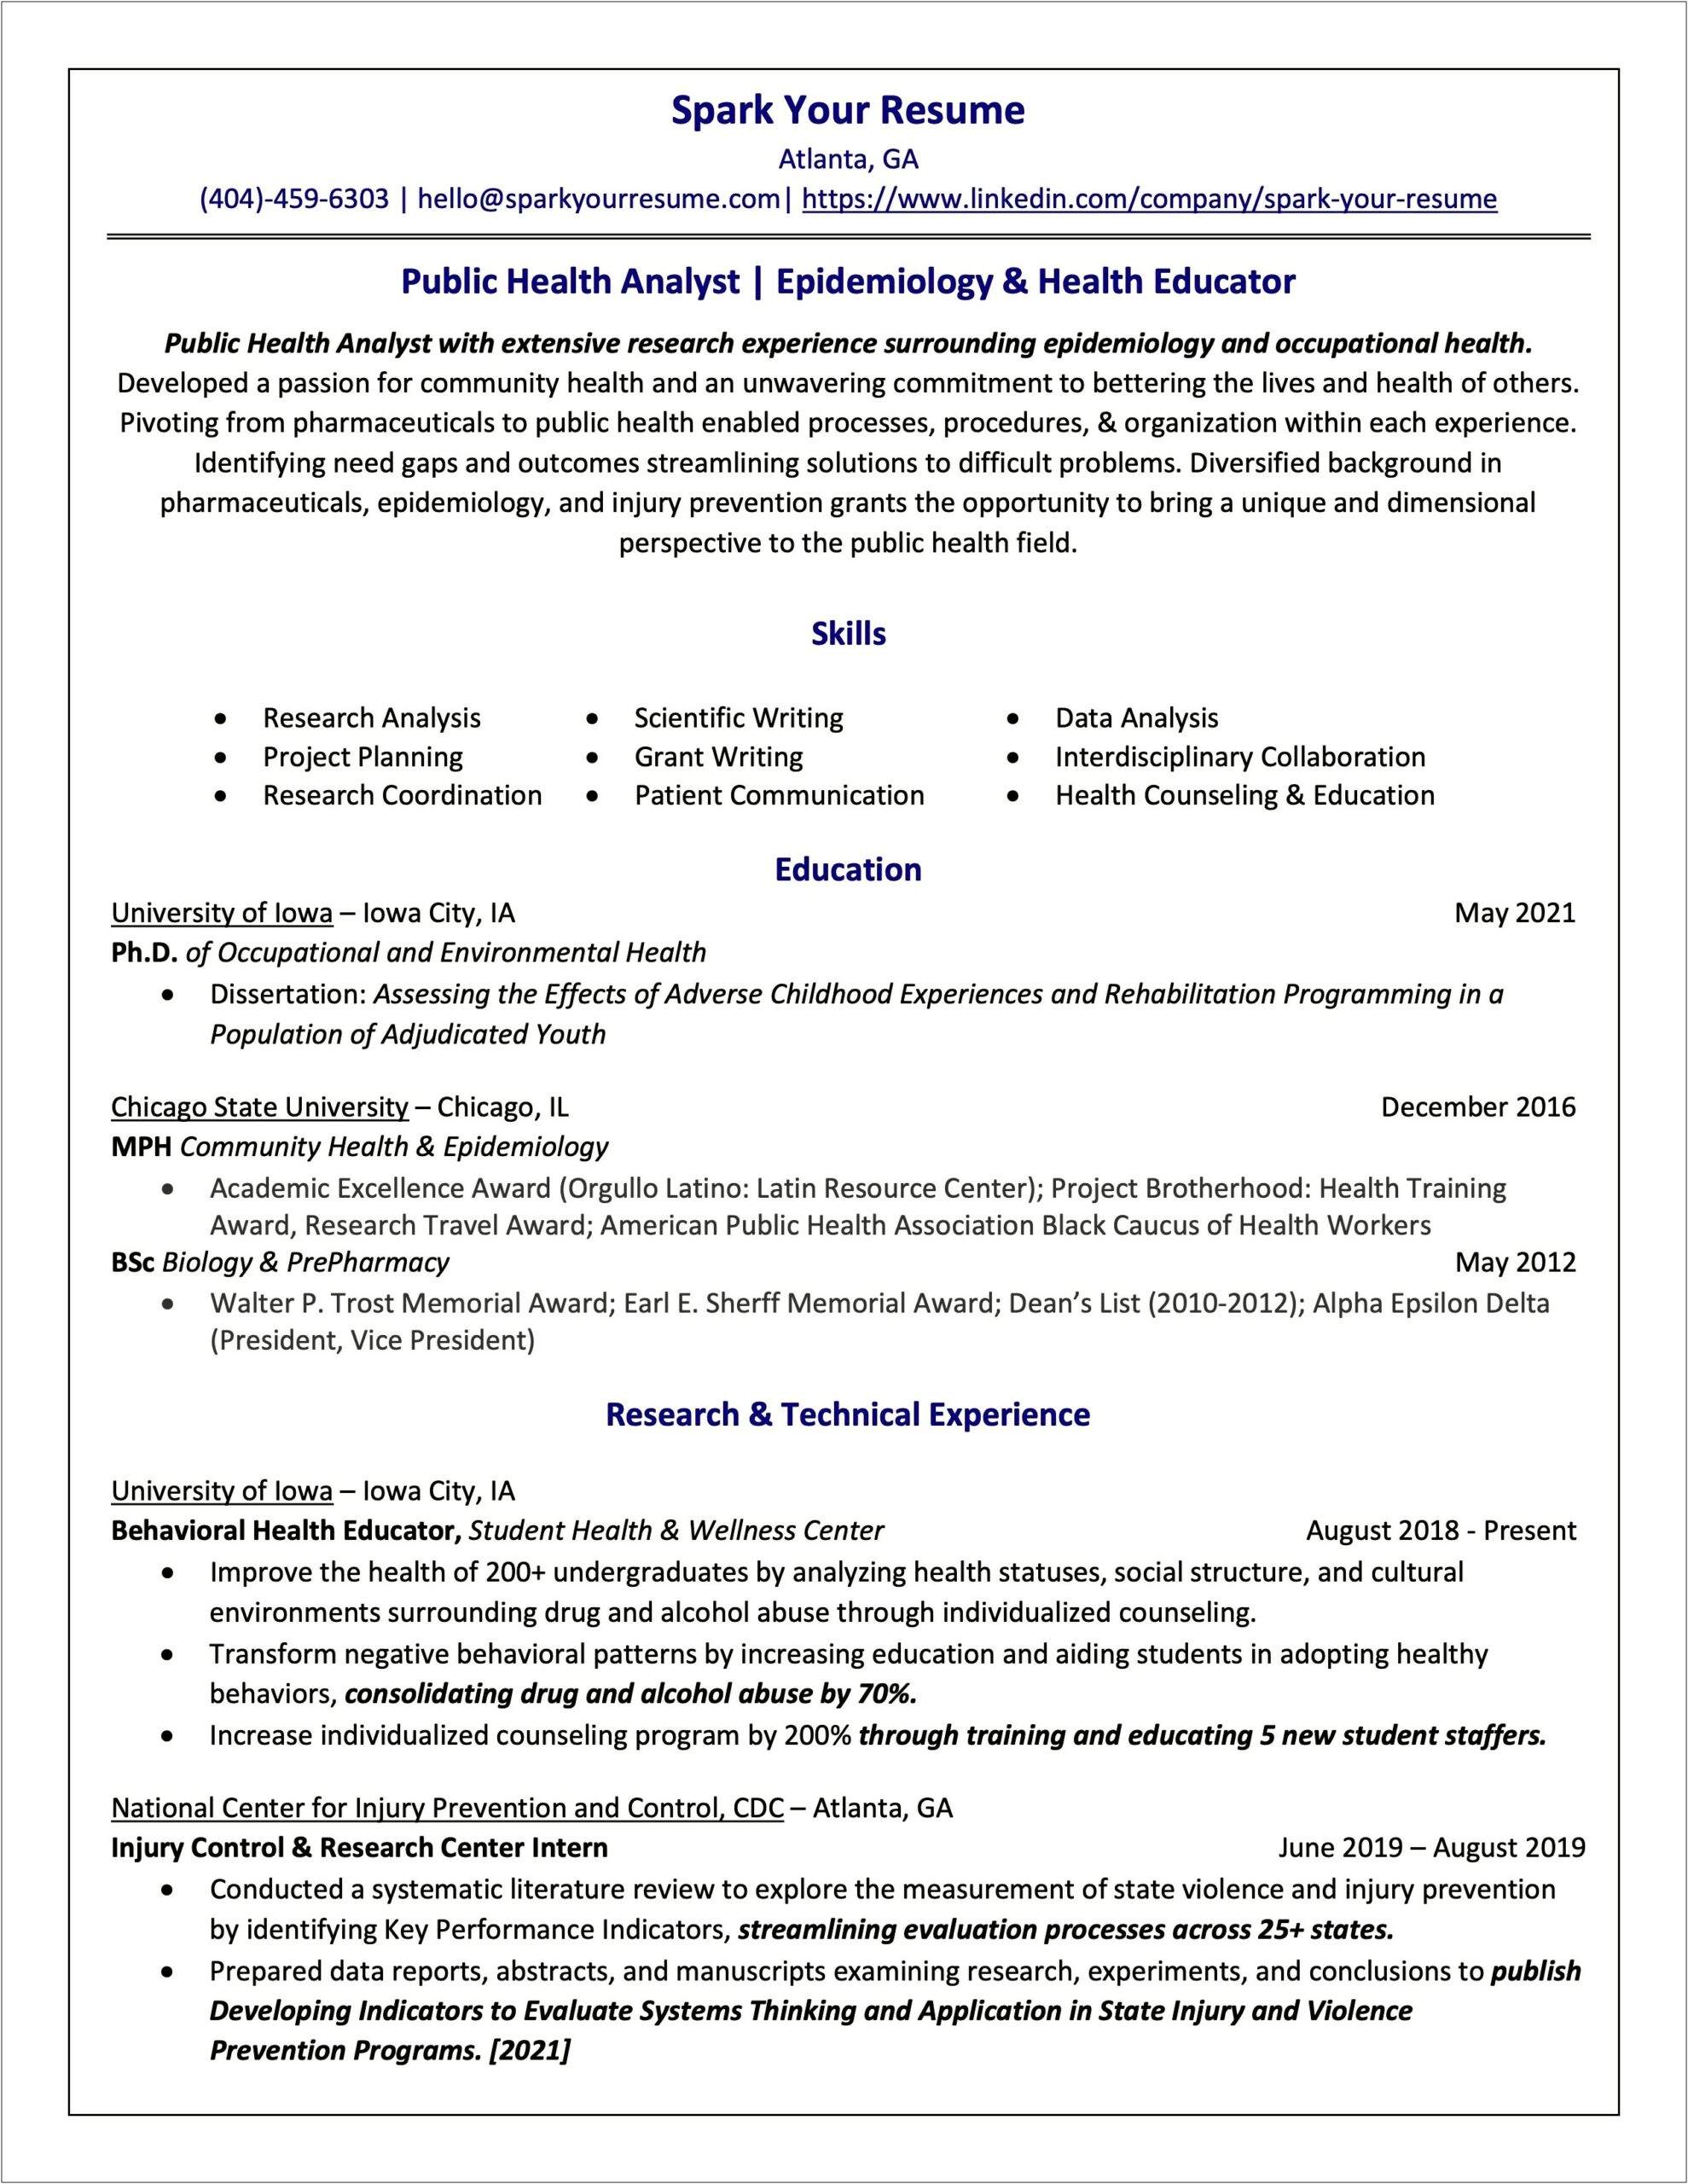 Injury Evaluation Experience Examples For Resume